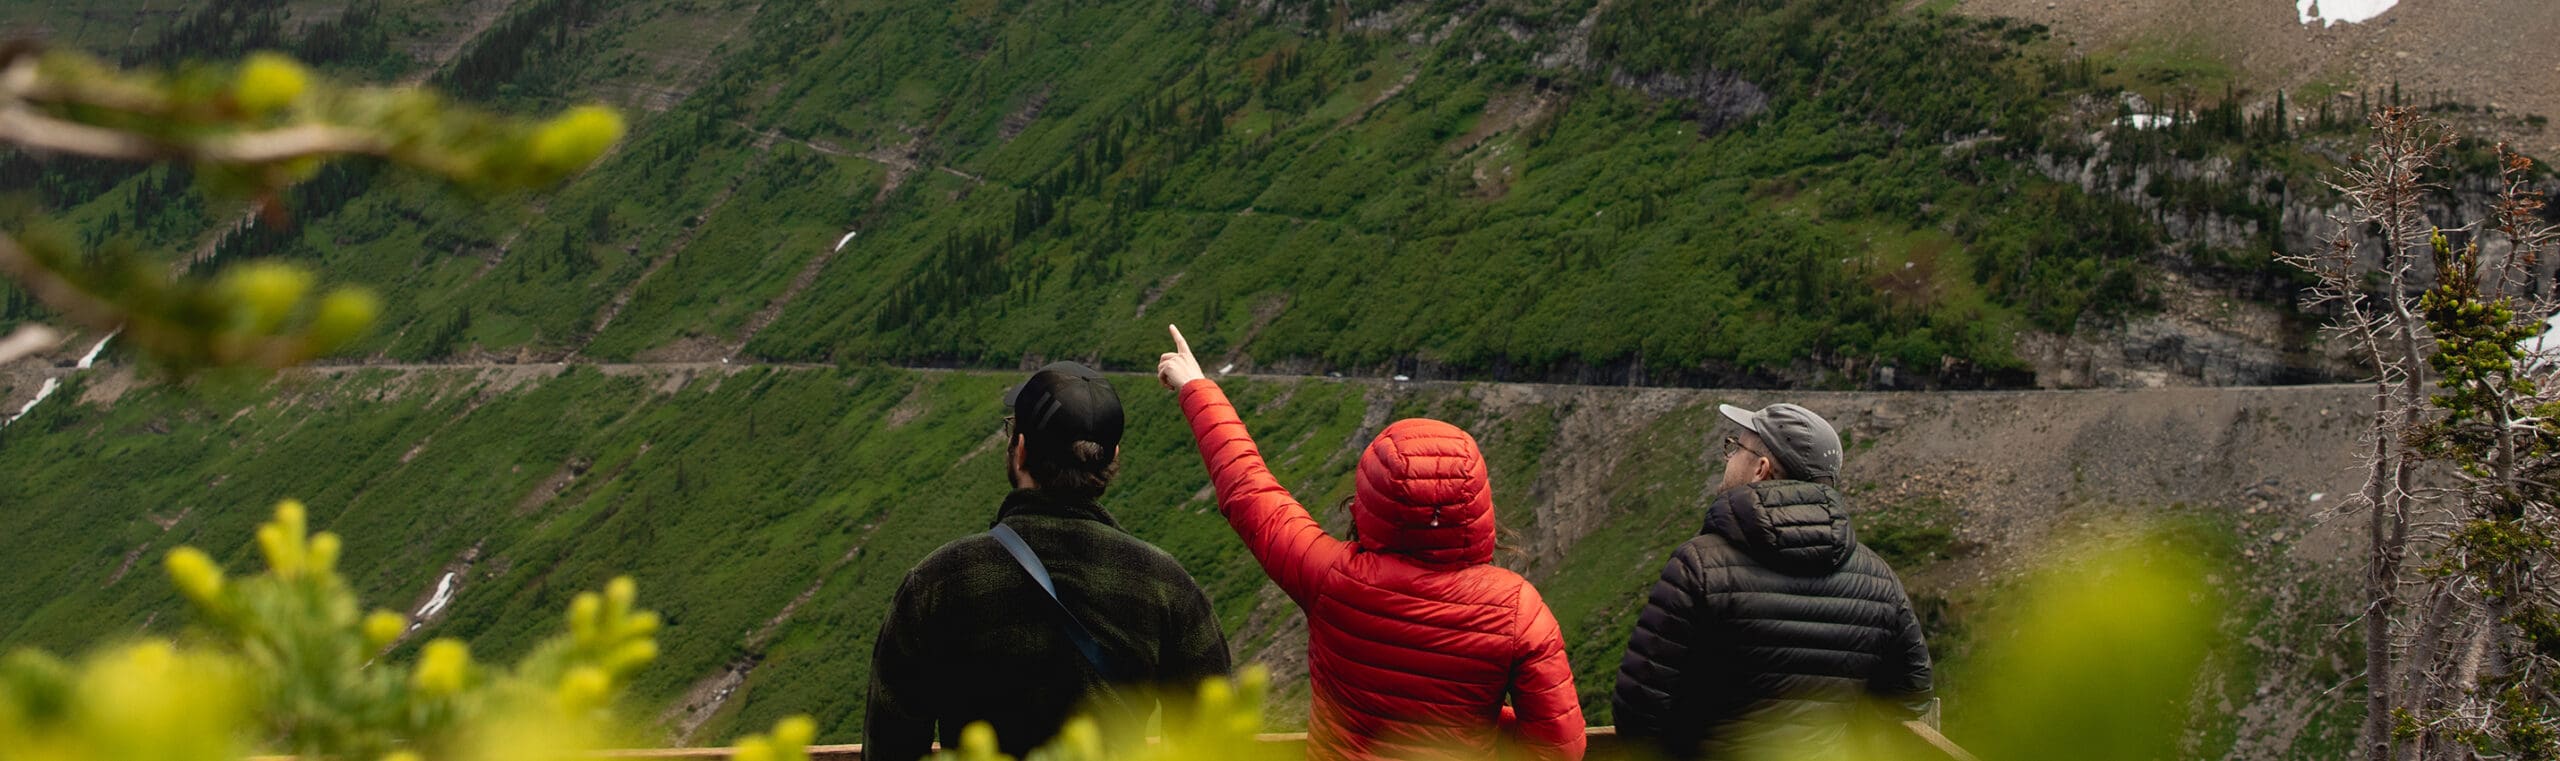 Three people point to a cloudy mountain landscape in Glacier National Park